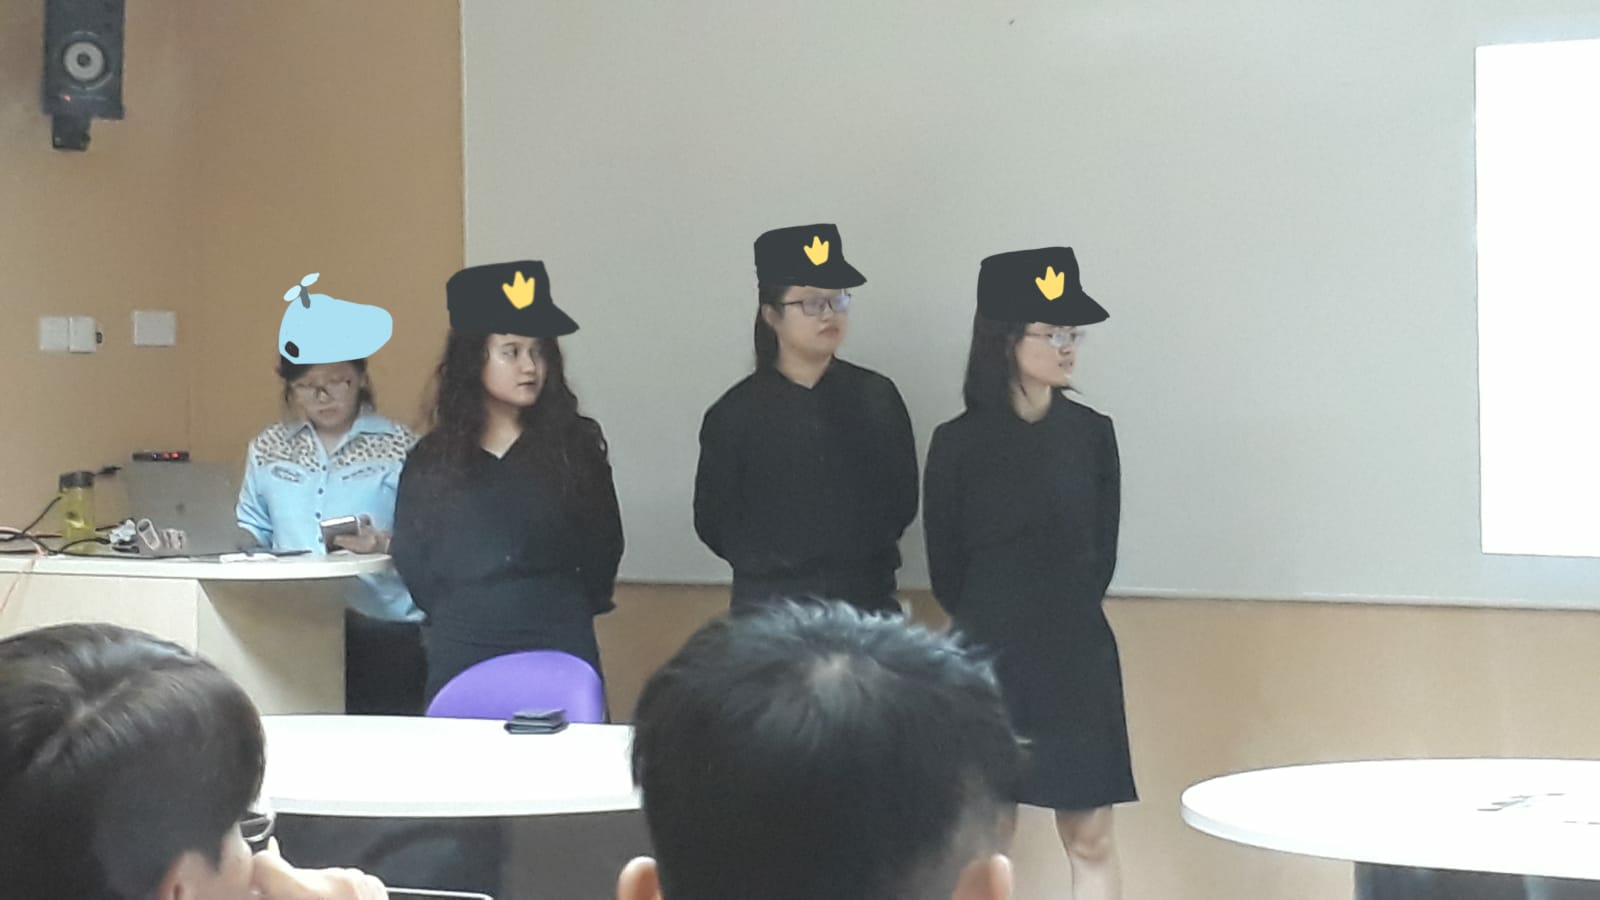 Group presentation in class during school life image